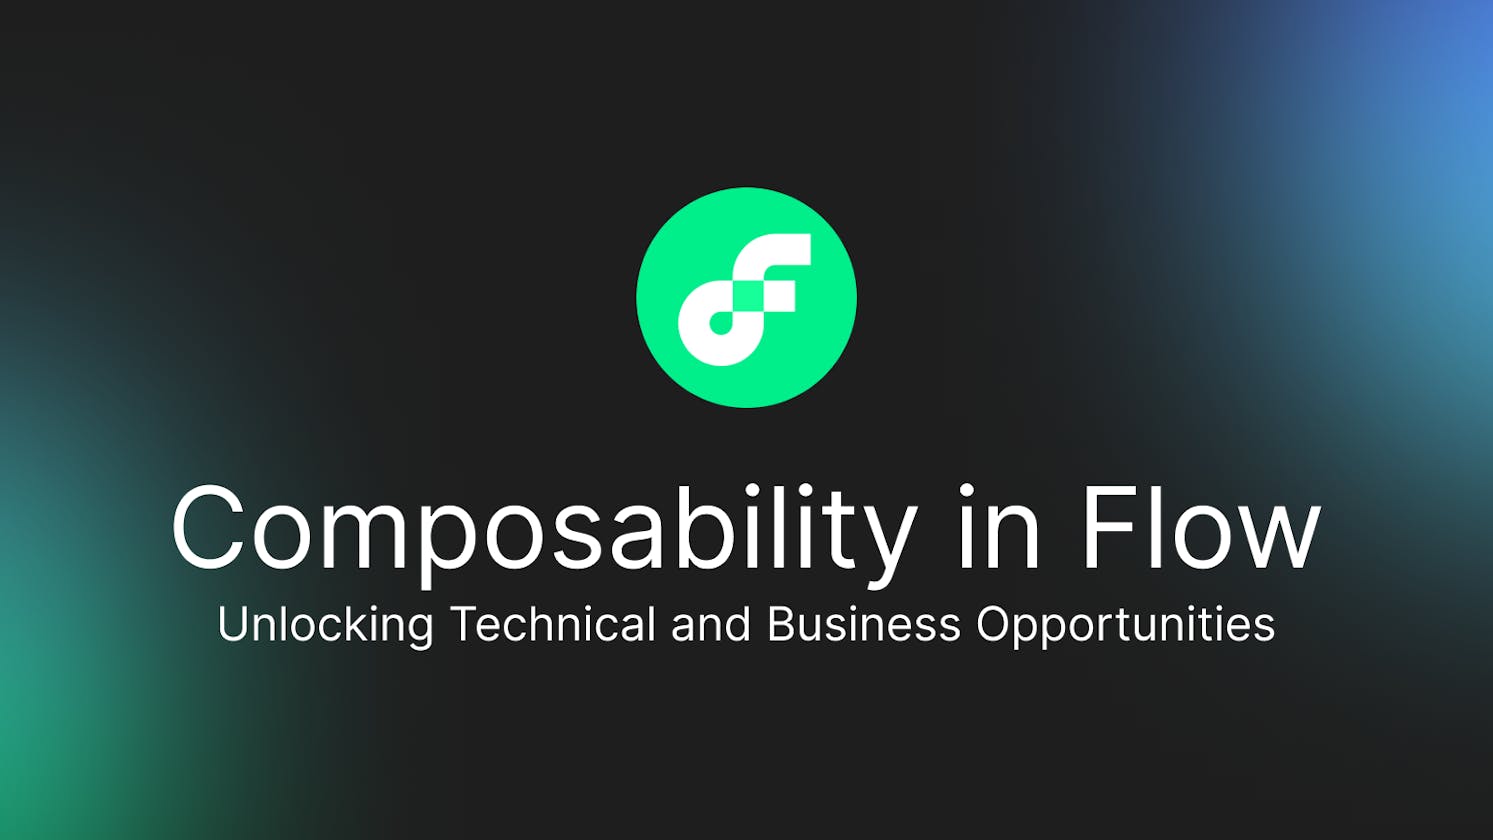 Composability in Flow: Unlocking Technical and Business Opportunities